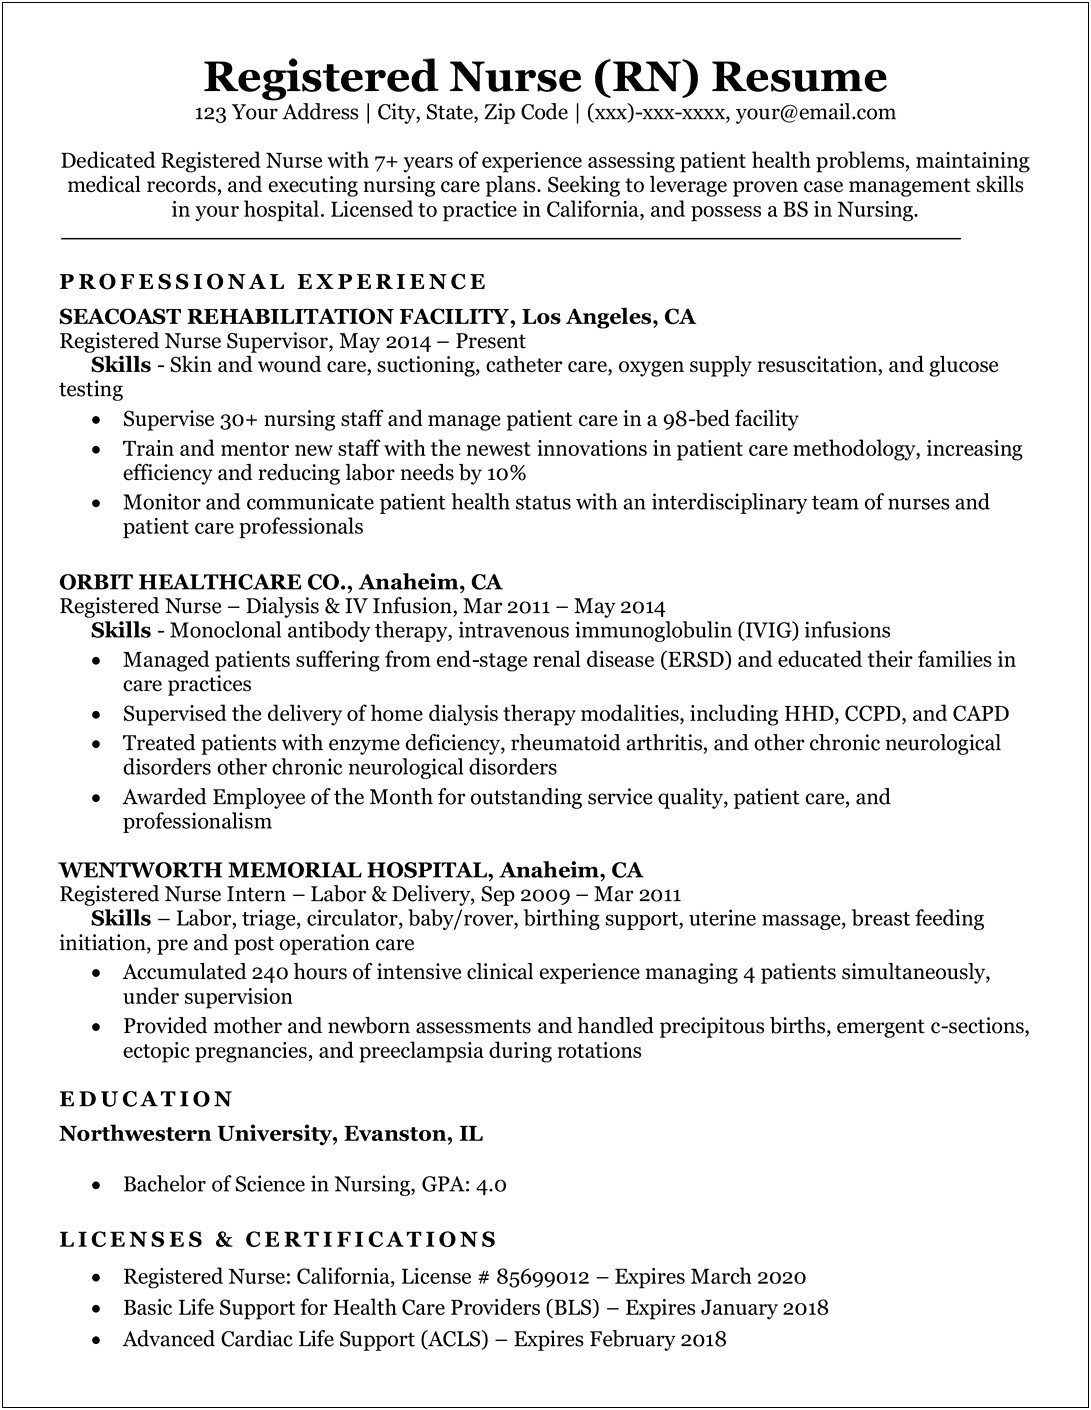 Sample Nurse Resume Without Experience